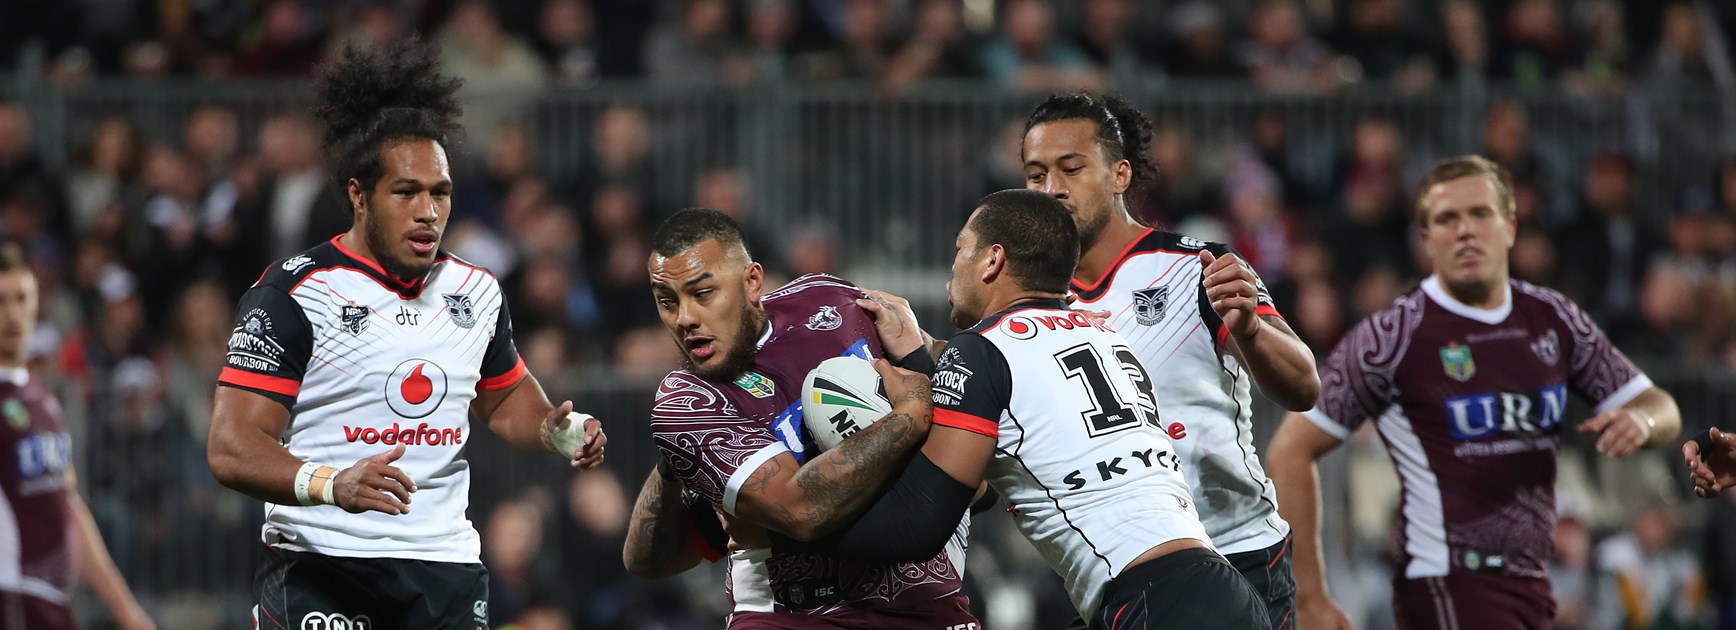 Manly lose 34-14 to Warriors